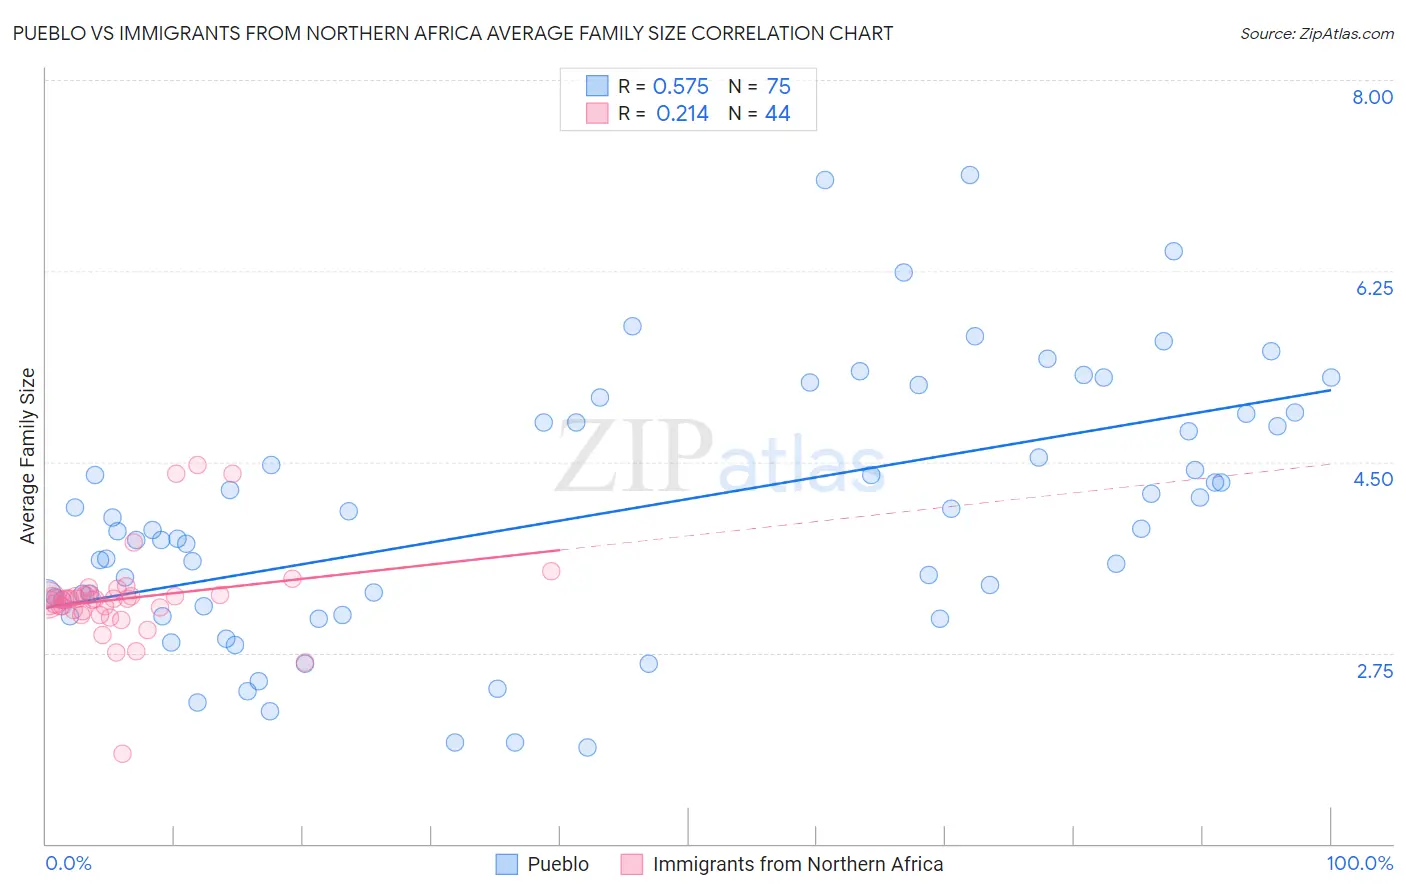 Pueblo vs Immigrants from Northern Africa Average Family Size